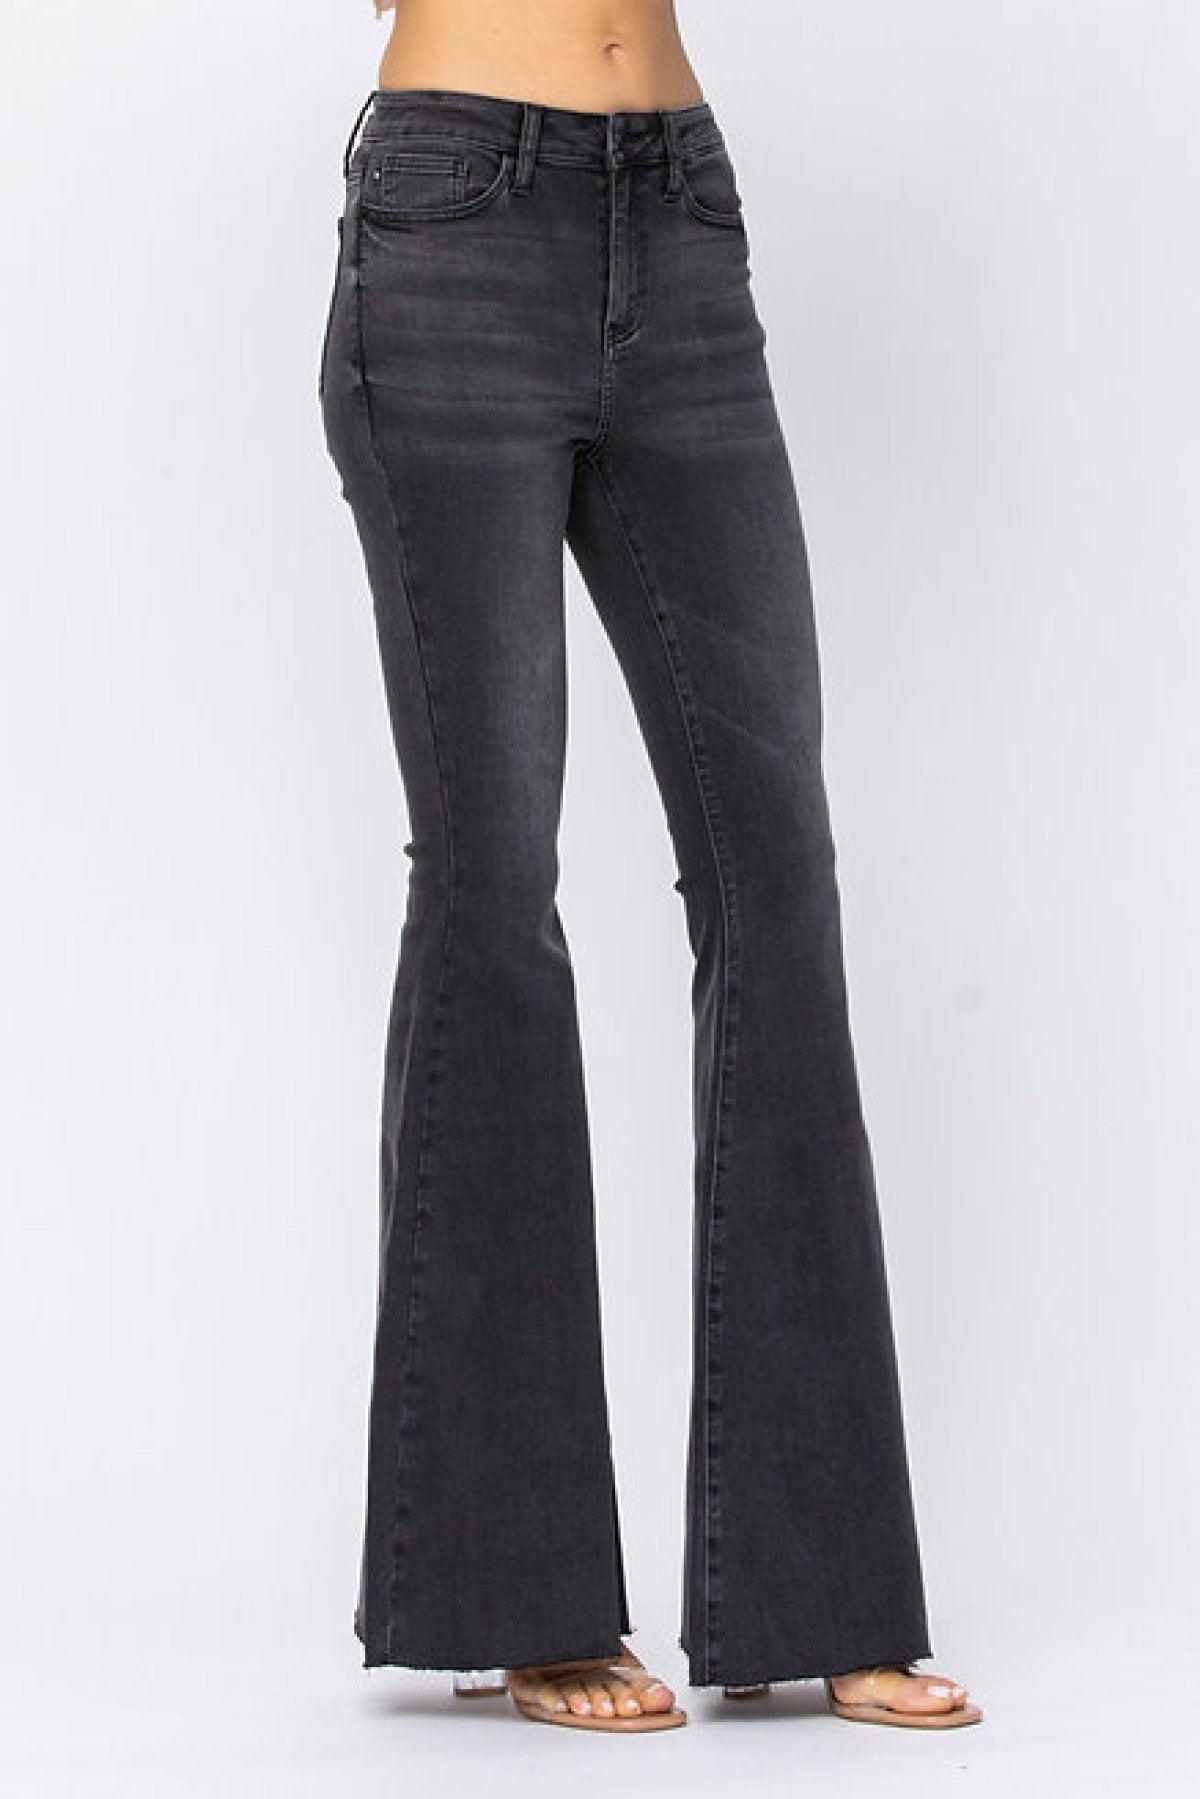 Judy Blue Black Wash Mid-Rise Super Flare Jeans